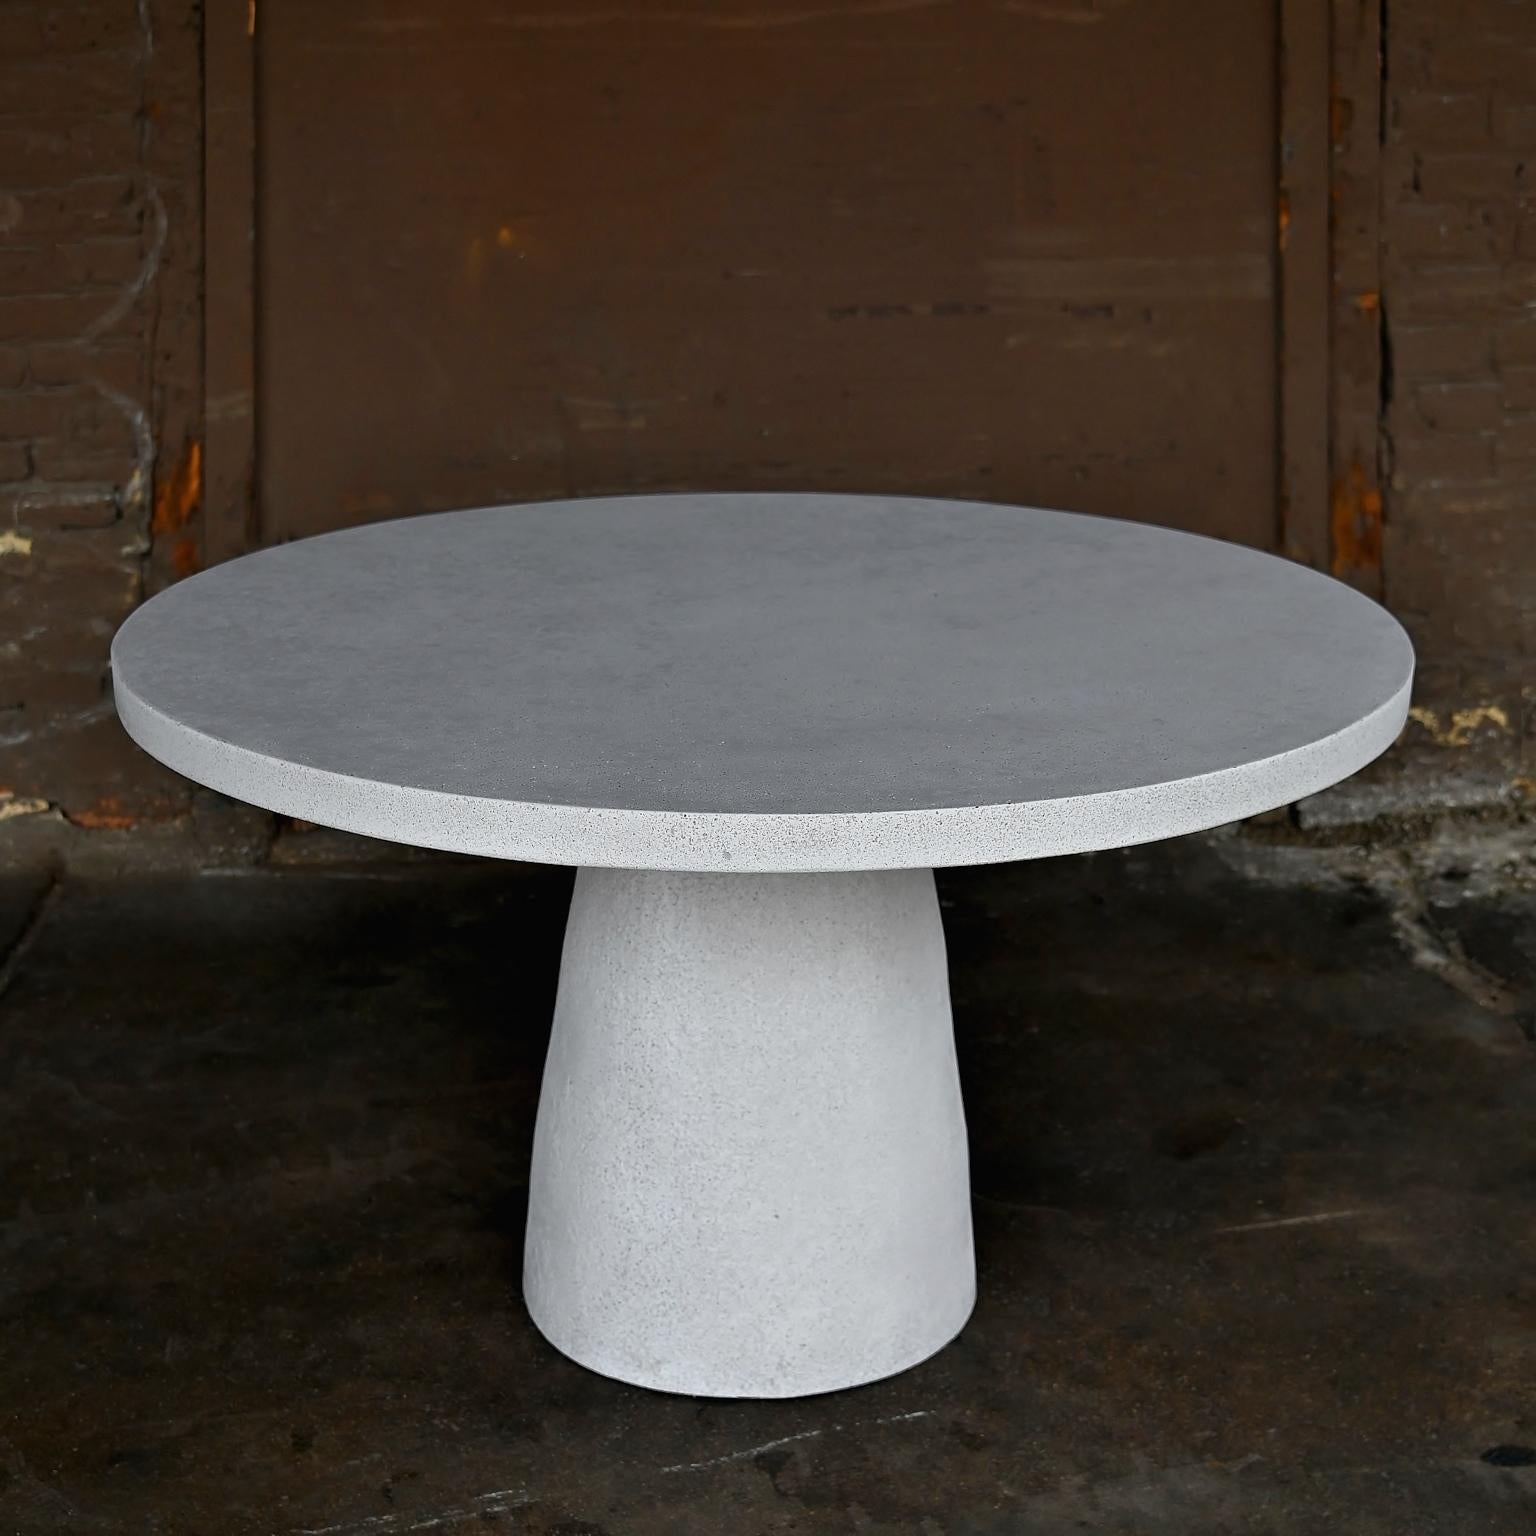 A gathering place of reunion. Passing plates around. Constant laughter and comfort. The bedrock of family.

Dimensions: Diameter 48 in. (122 cm). Height 29 in. (73.6 cm). Weight 100 lbs. (45 kg)

Finish color options:
white stone